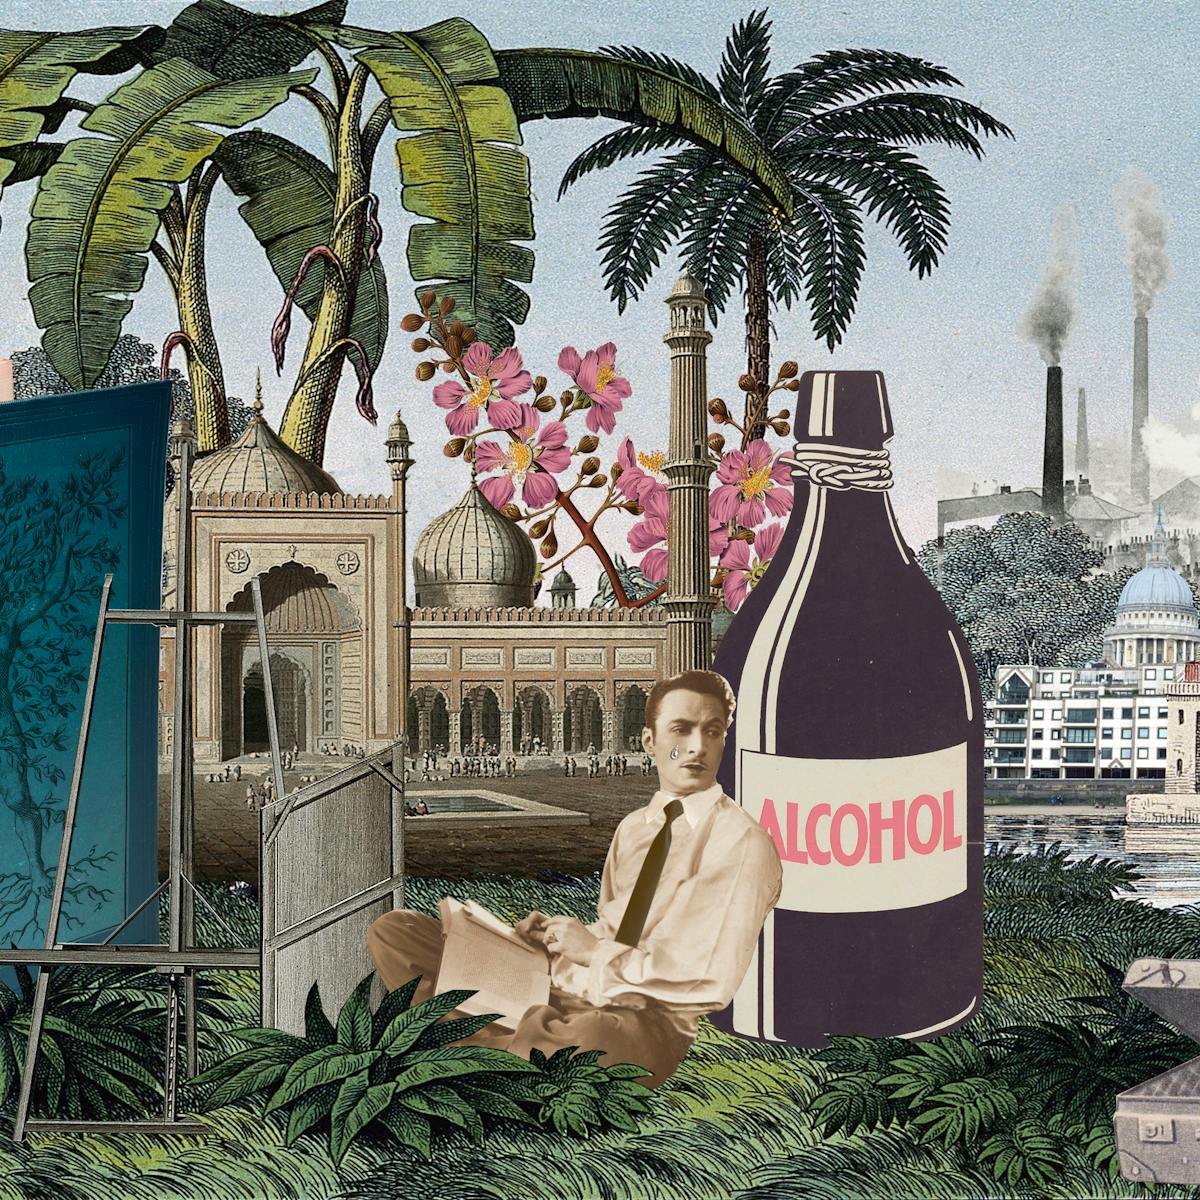 Artwork using collage. The collaged elements are made up of archive material which includes vintage photographs, etchings, painted illustrations, lithographic prints and line drawings. This artwork depicts a scene with an urban and rural combined background, where high chimneys billowing smoke and skyscrapers rise in the distance. In the middle distance an are tall palm trees and an expanse of water with a small boat. In the foreground on the left is a lion on his hind legs, mouth open in a roar. Behind and to the right of the lion is a large blue hardback book. On the cover is the figure of a naked man with his arms outstretched above his head. Branches grow out of his arms, torso and legs and roots grow out of his feet. Next to the book is an empty artist's easel with a stretched canvas leaning against it. In the centre of the image a man in a shirt and tie sits cross legged with a notebook on his lap, looking to one side. A tear falls down his right cheek. He is leaning against a large bottle with the word 'alcohol' written on its label. To the far right are a couple of suitcases, one is open with a red heart inside, the other has a building floor plan drawn on its lid. In the blue sky on the right is a helicopter and on the left, a moon like orb.